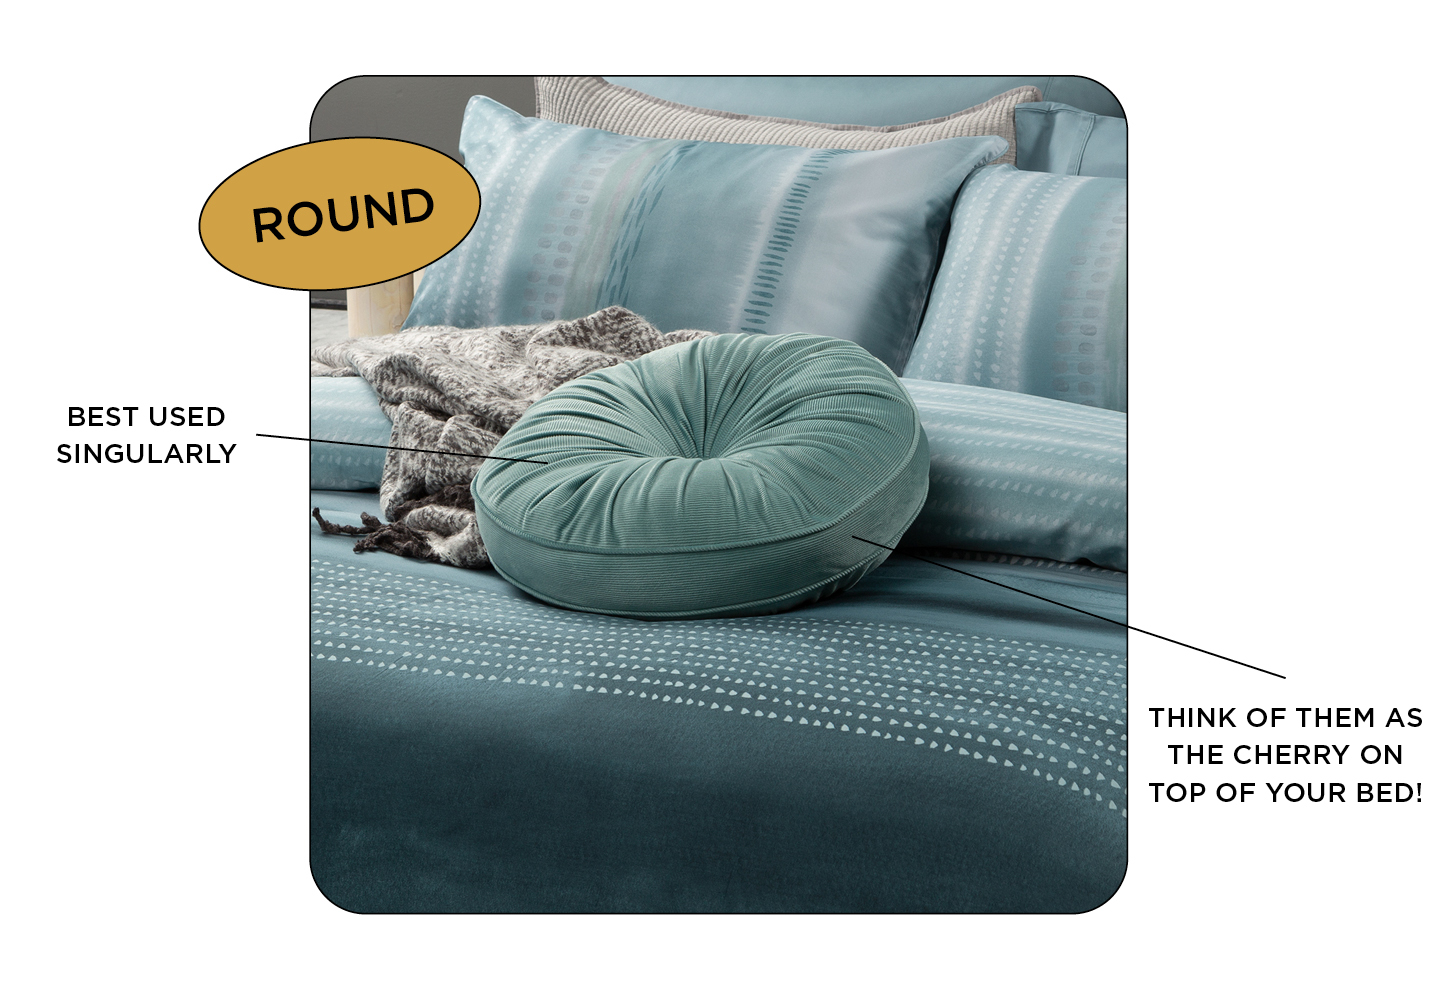 Finally, A Basic Guide To All Those Decorative Pillows